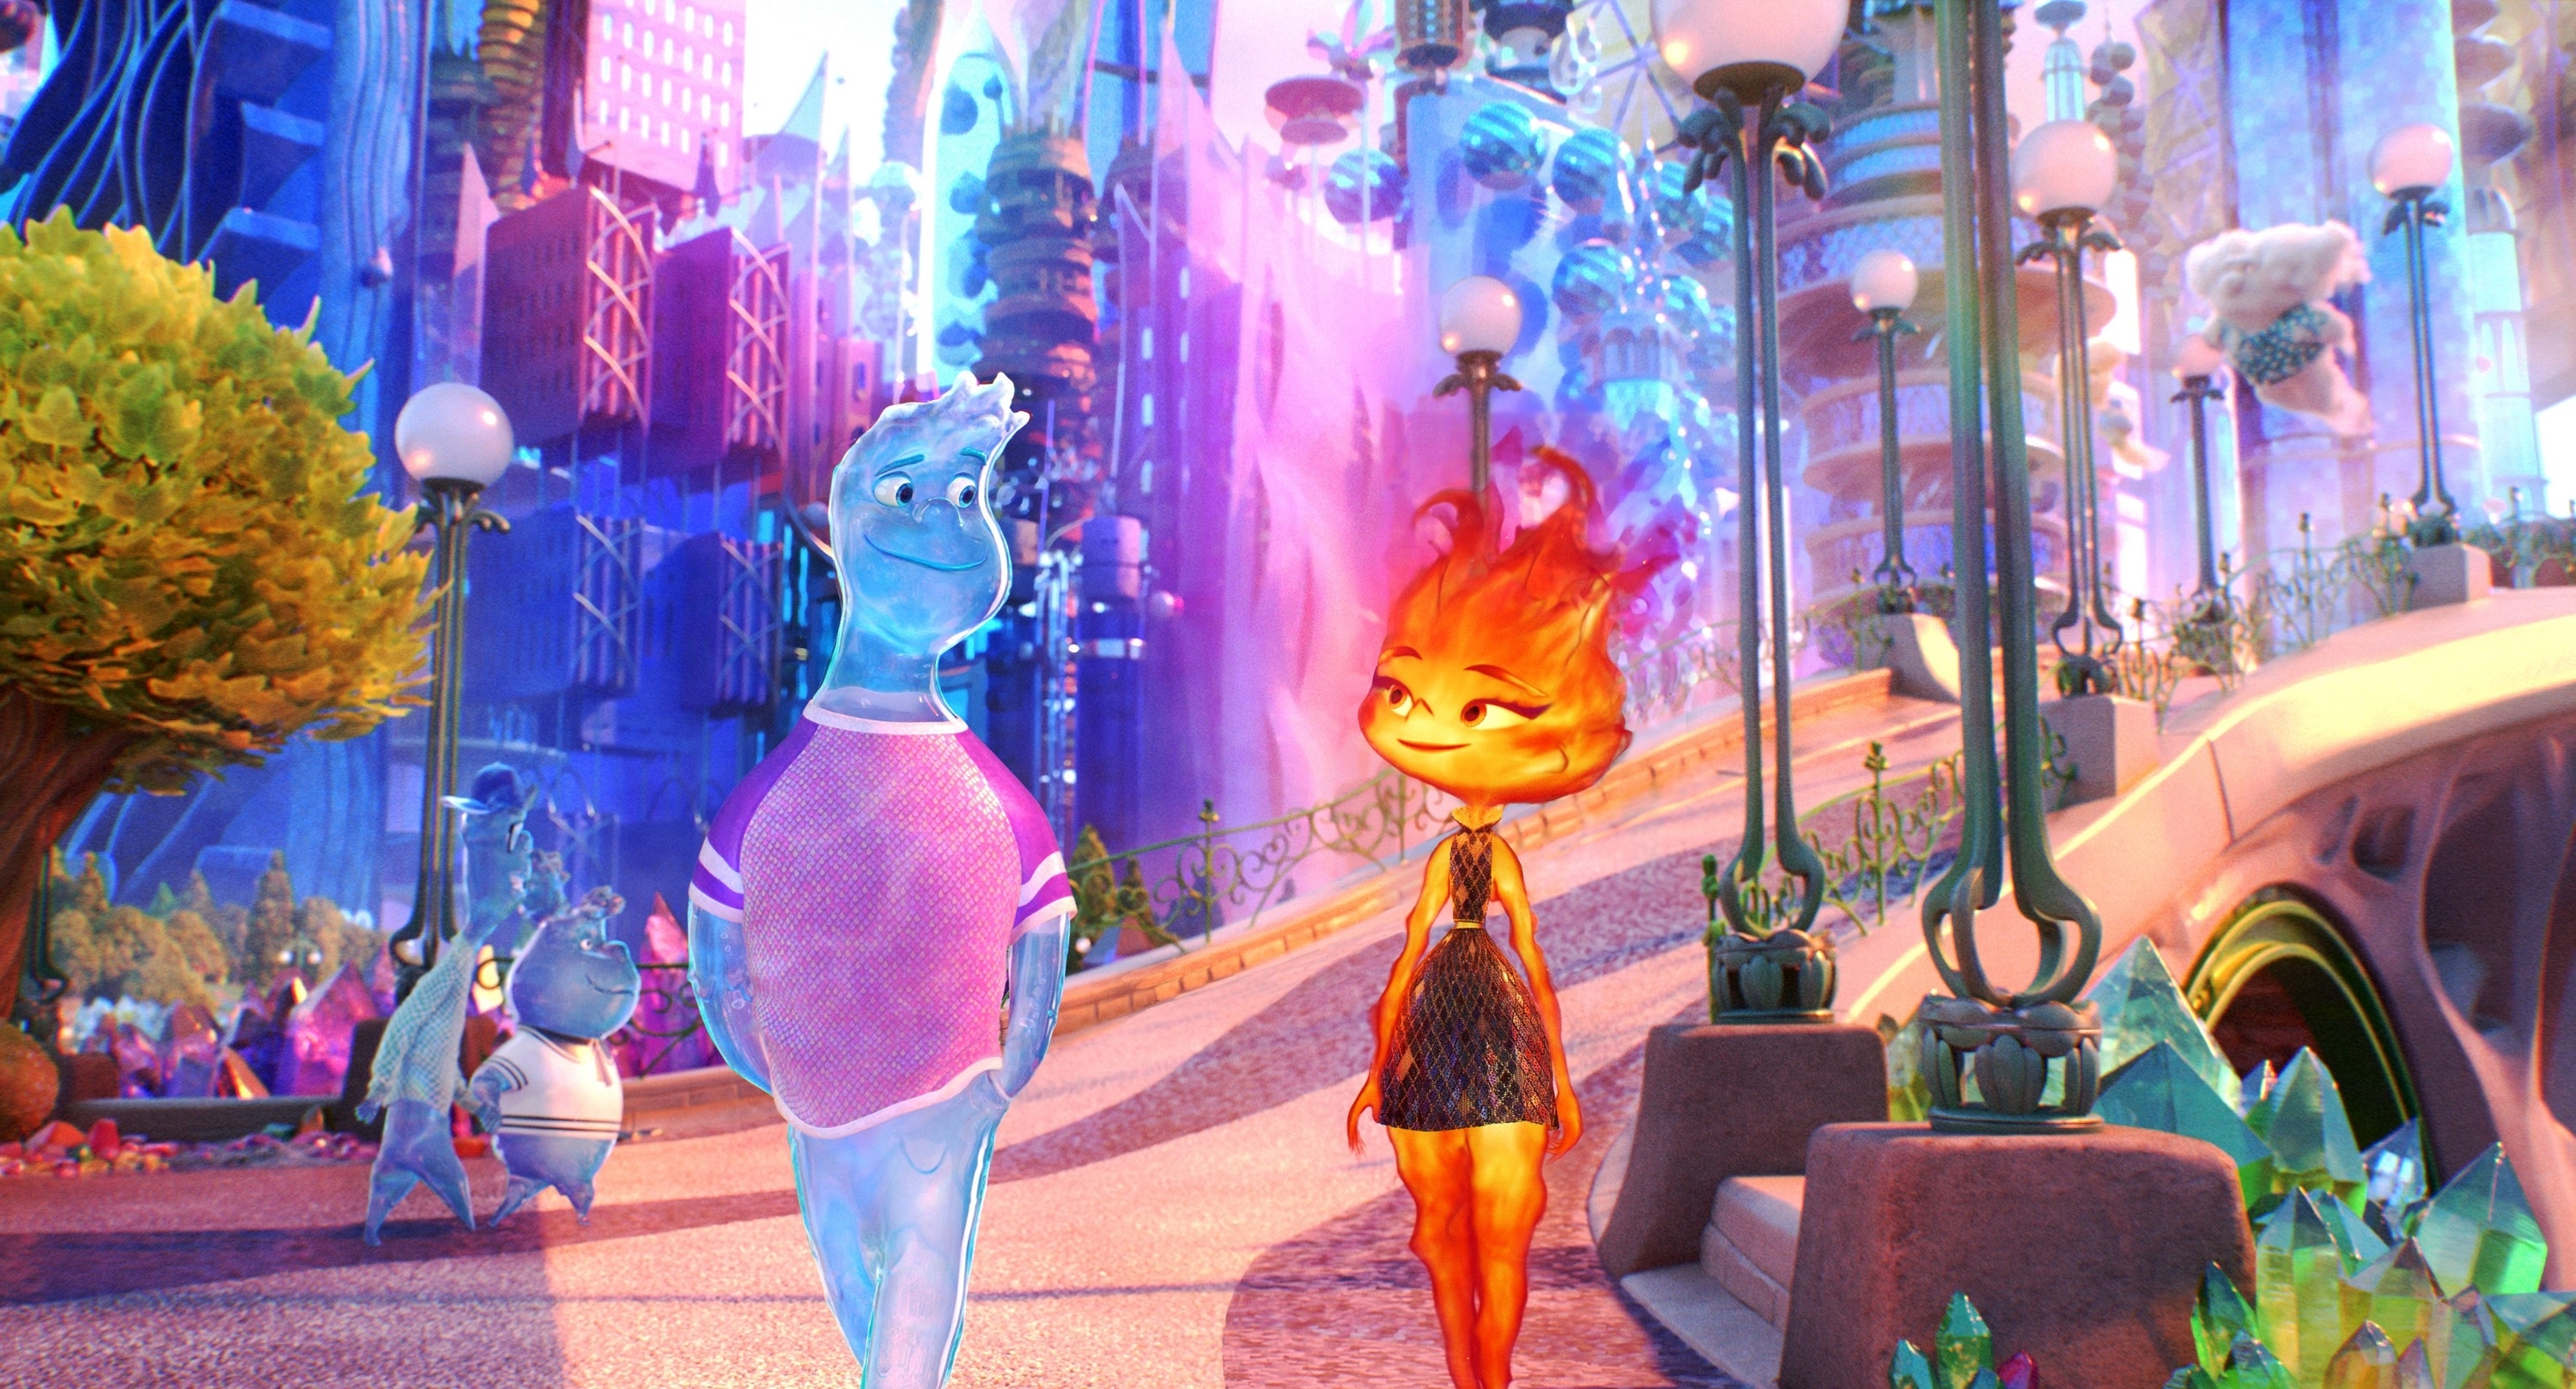 Wade and Ember walking together in the animated movie